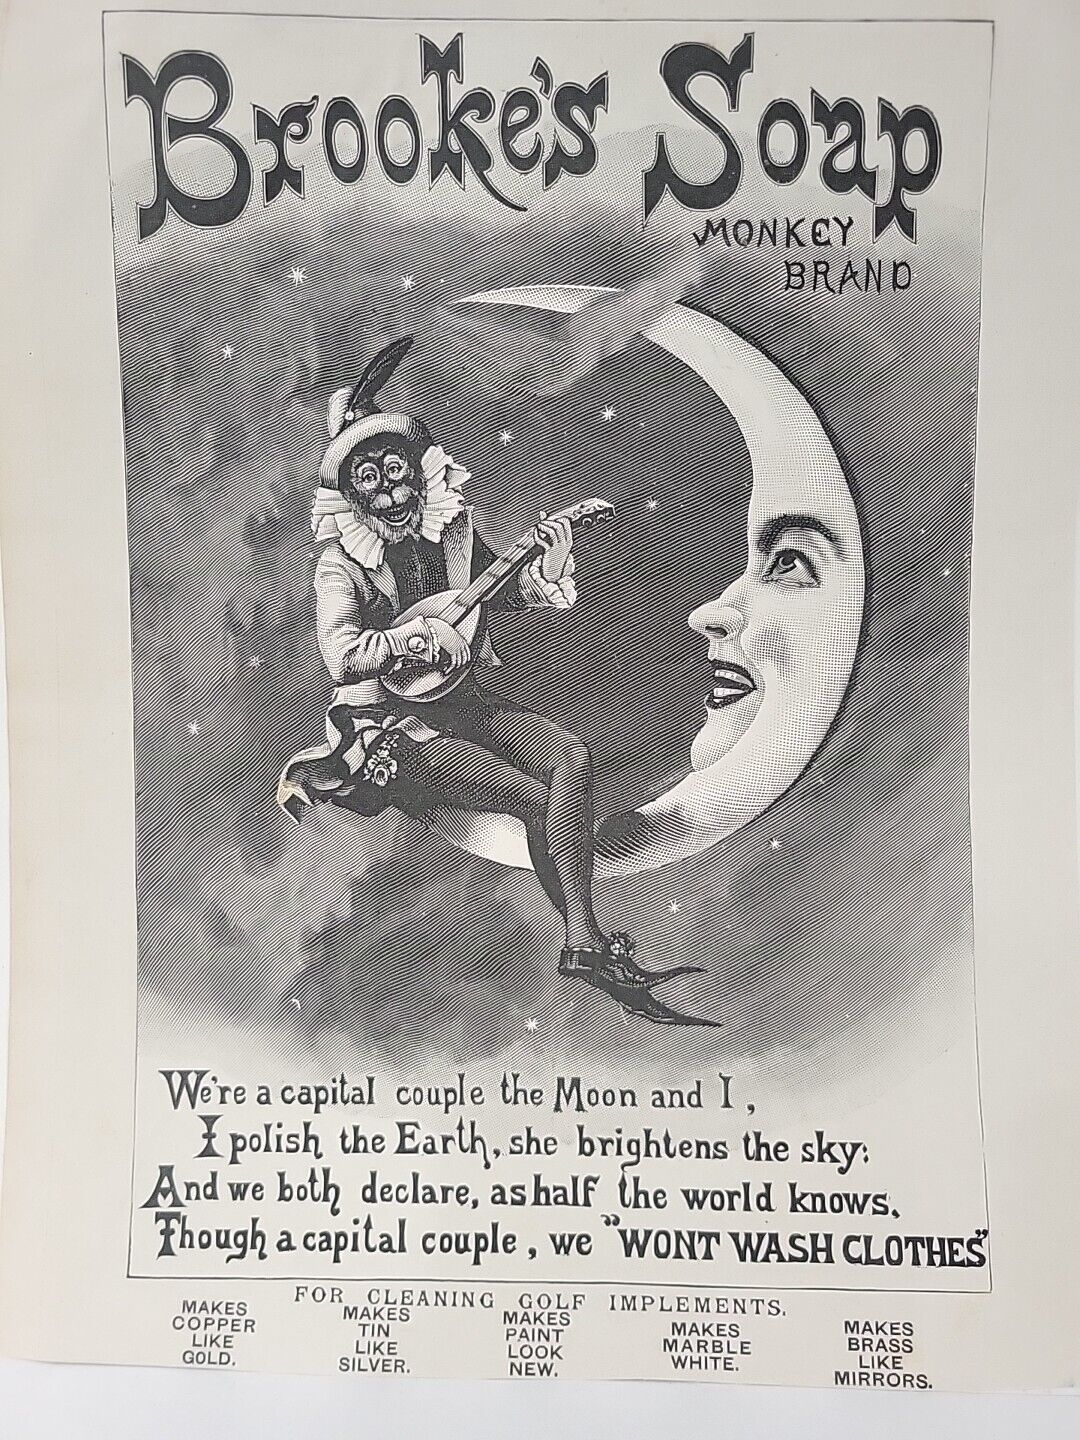 1891 Brooke\'s Soap Monkey Brand  Print Ad The Graphic Smiling Moon Minstrel Star